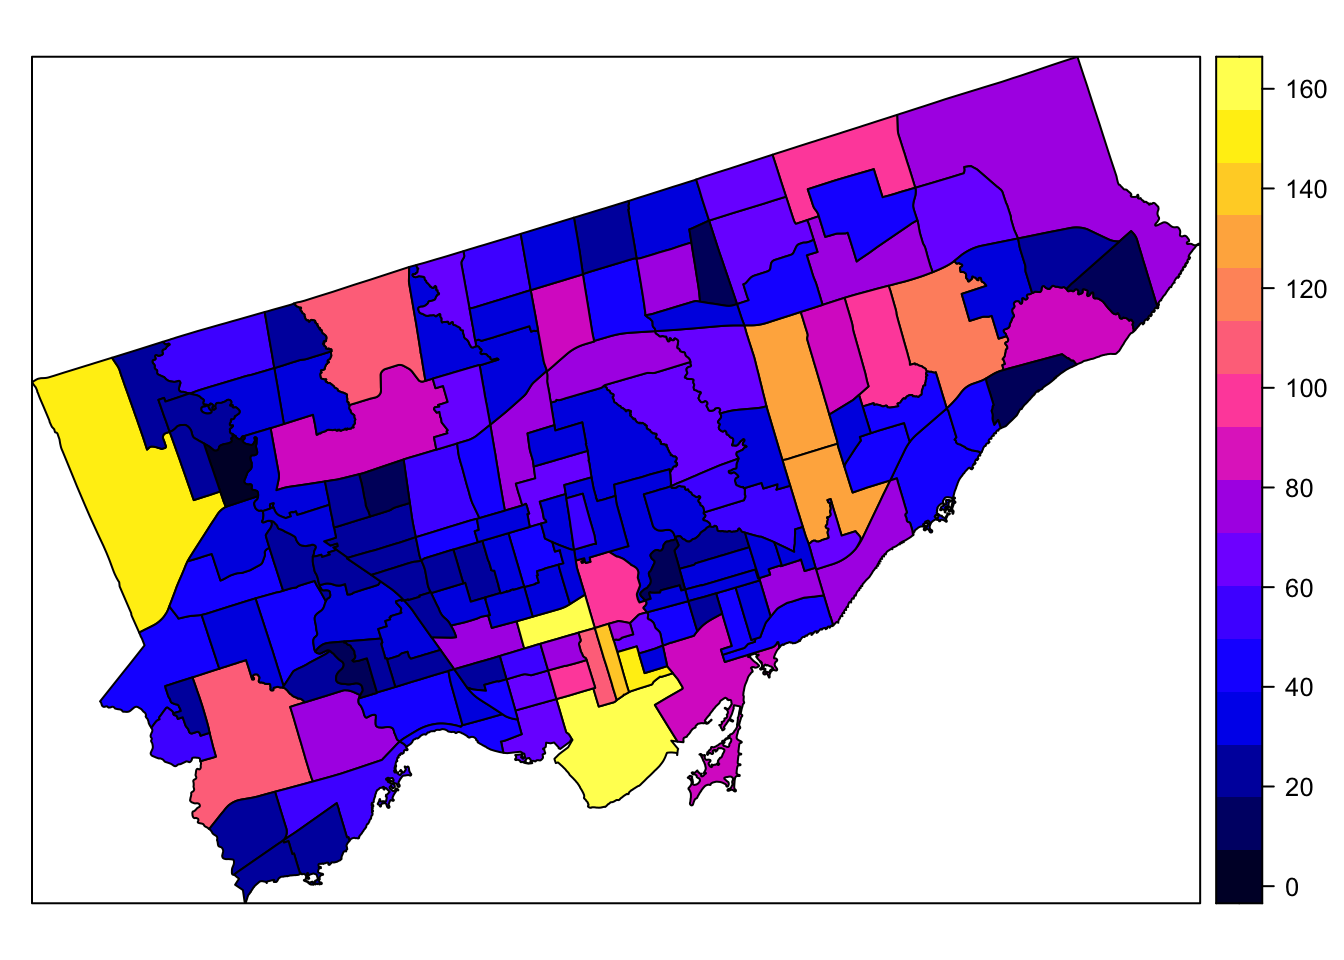 Map of the City of Toronto neighbourhoods with shading representing break and enter crime data from 2014.